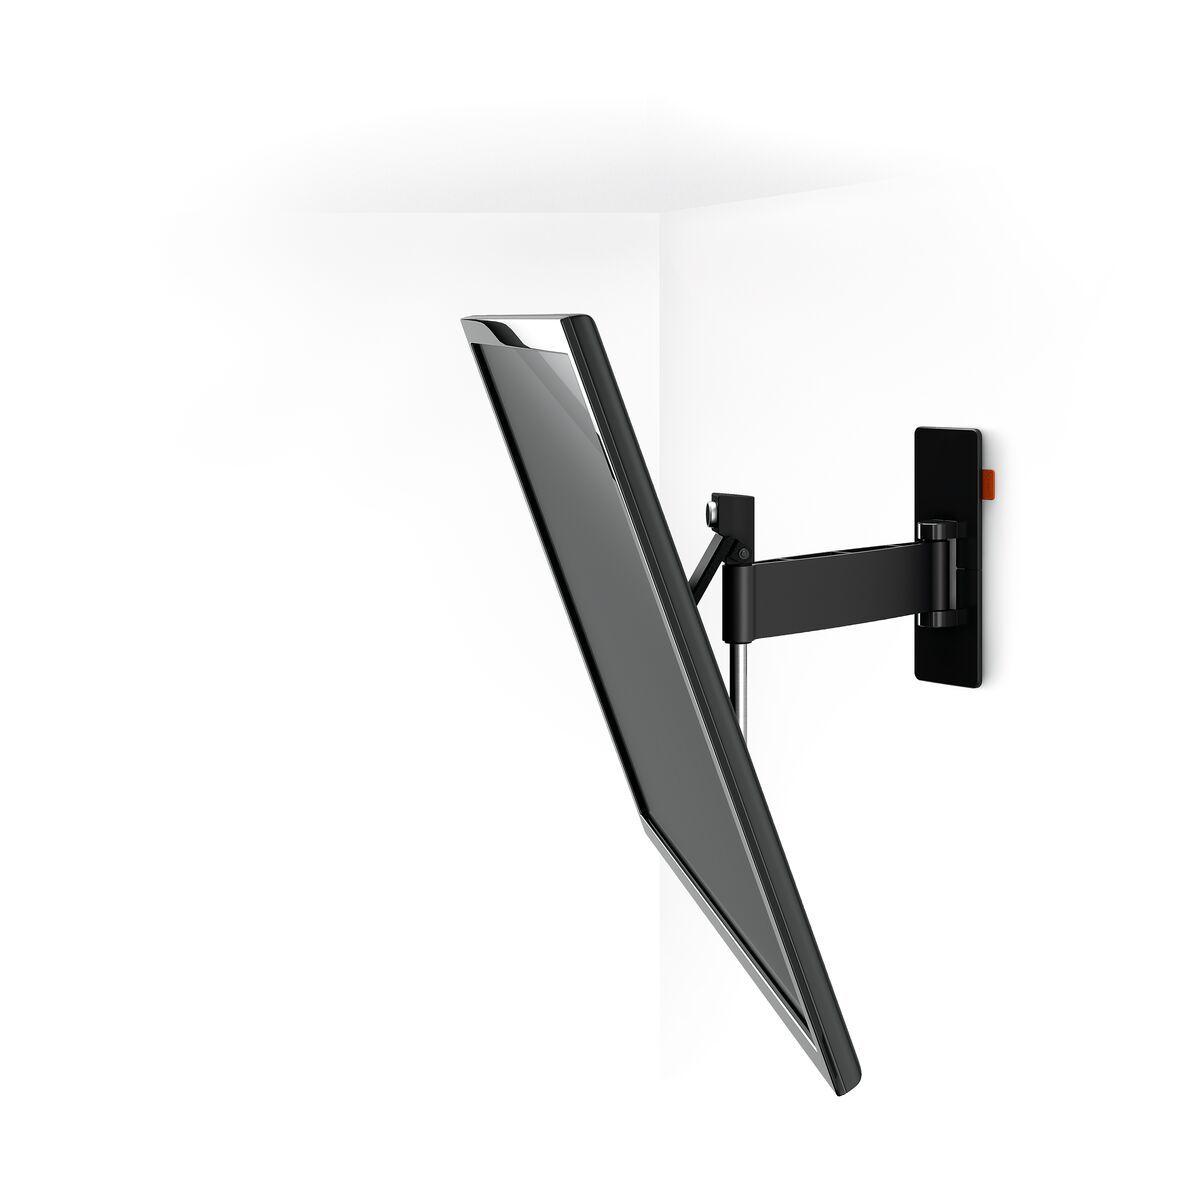 Vogel's WALL 2325 Full-Motion TV Wall Mount (black) - Suitable for 40 up to 65 inch TVs - Motion (up to 120°) - Tilt up to 20° - Detail